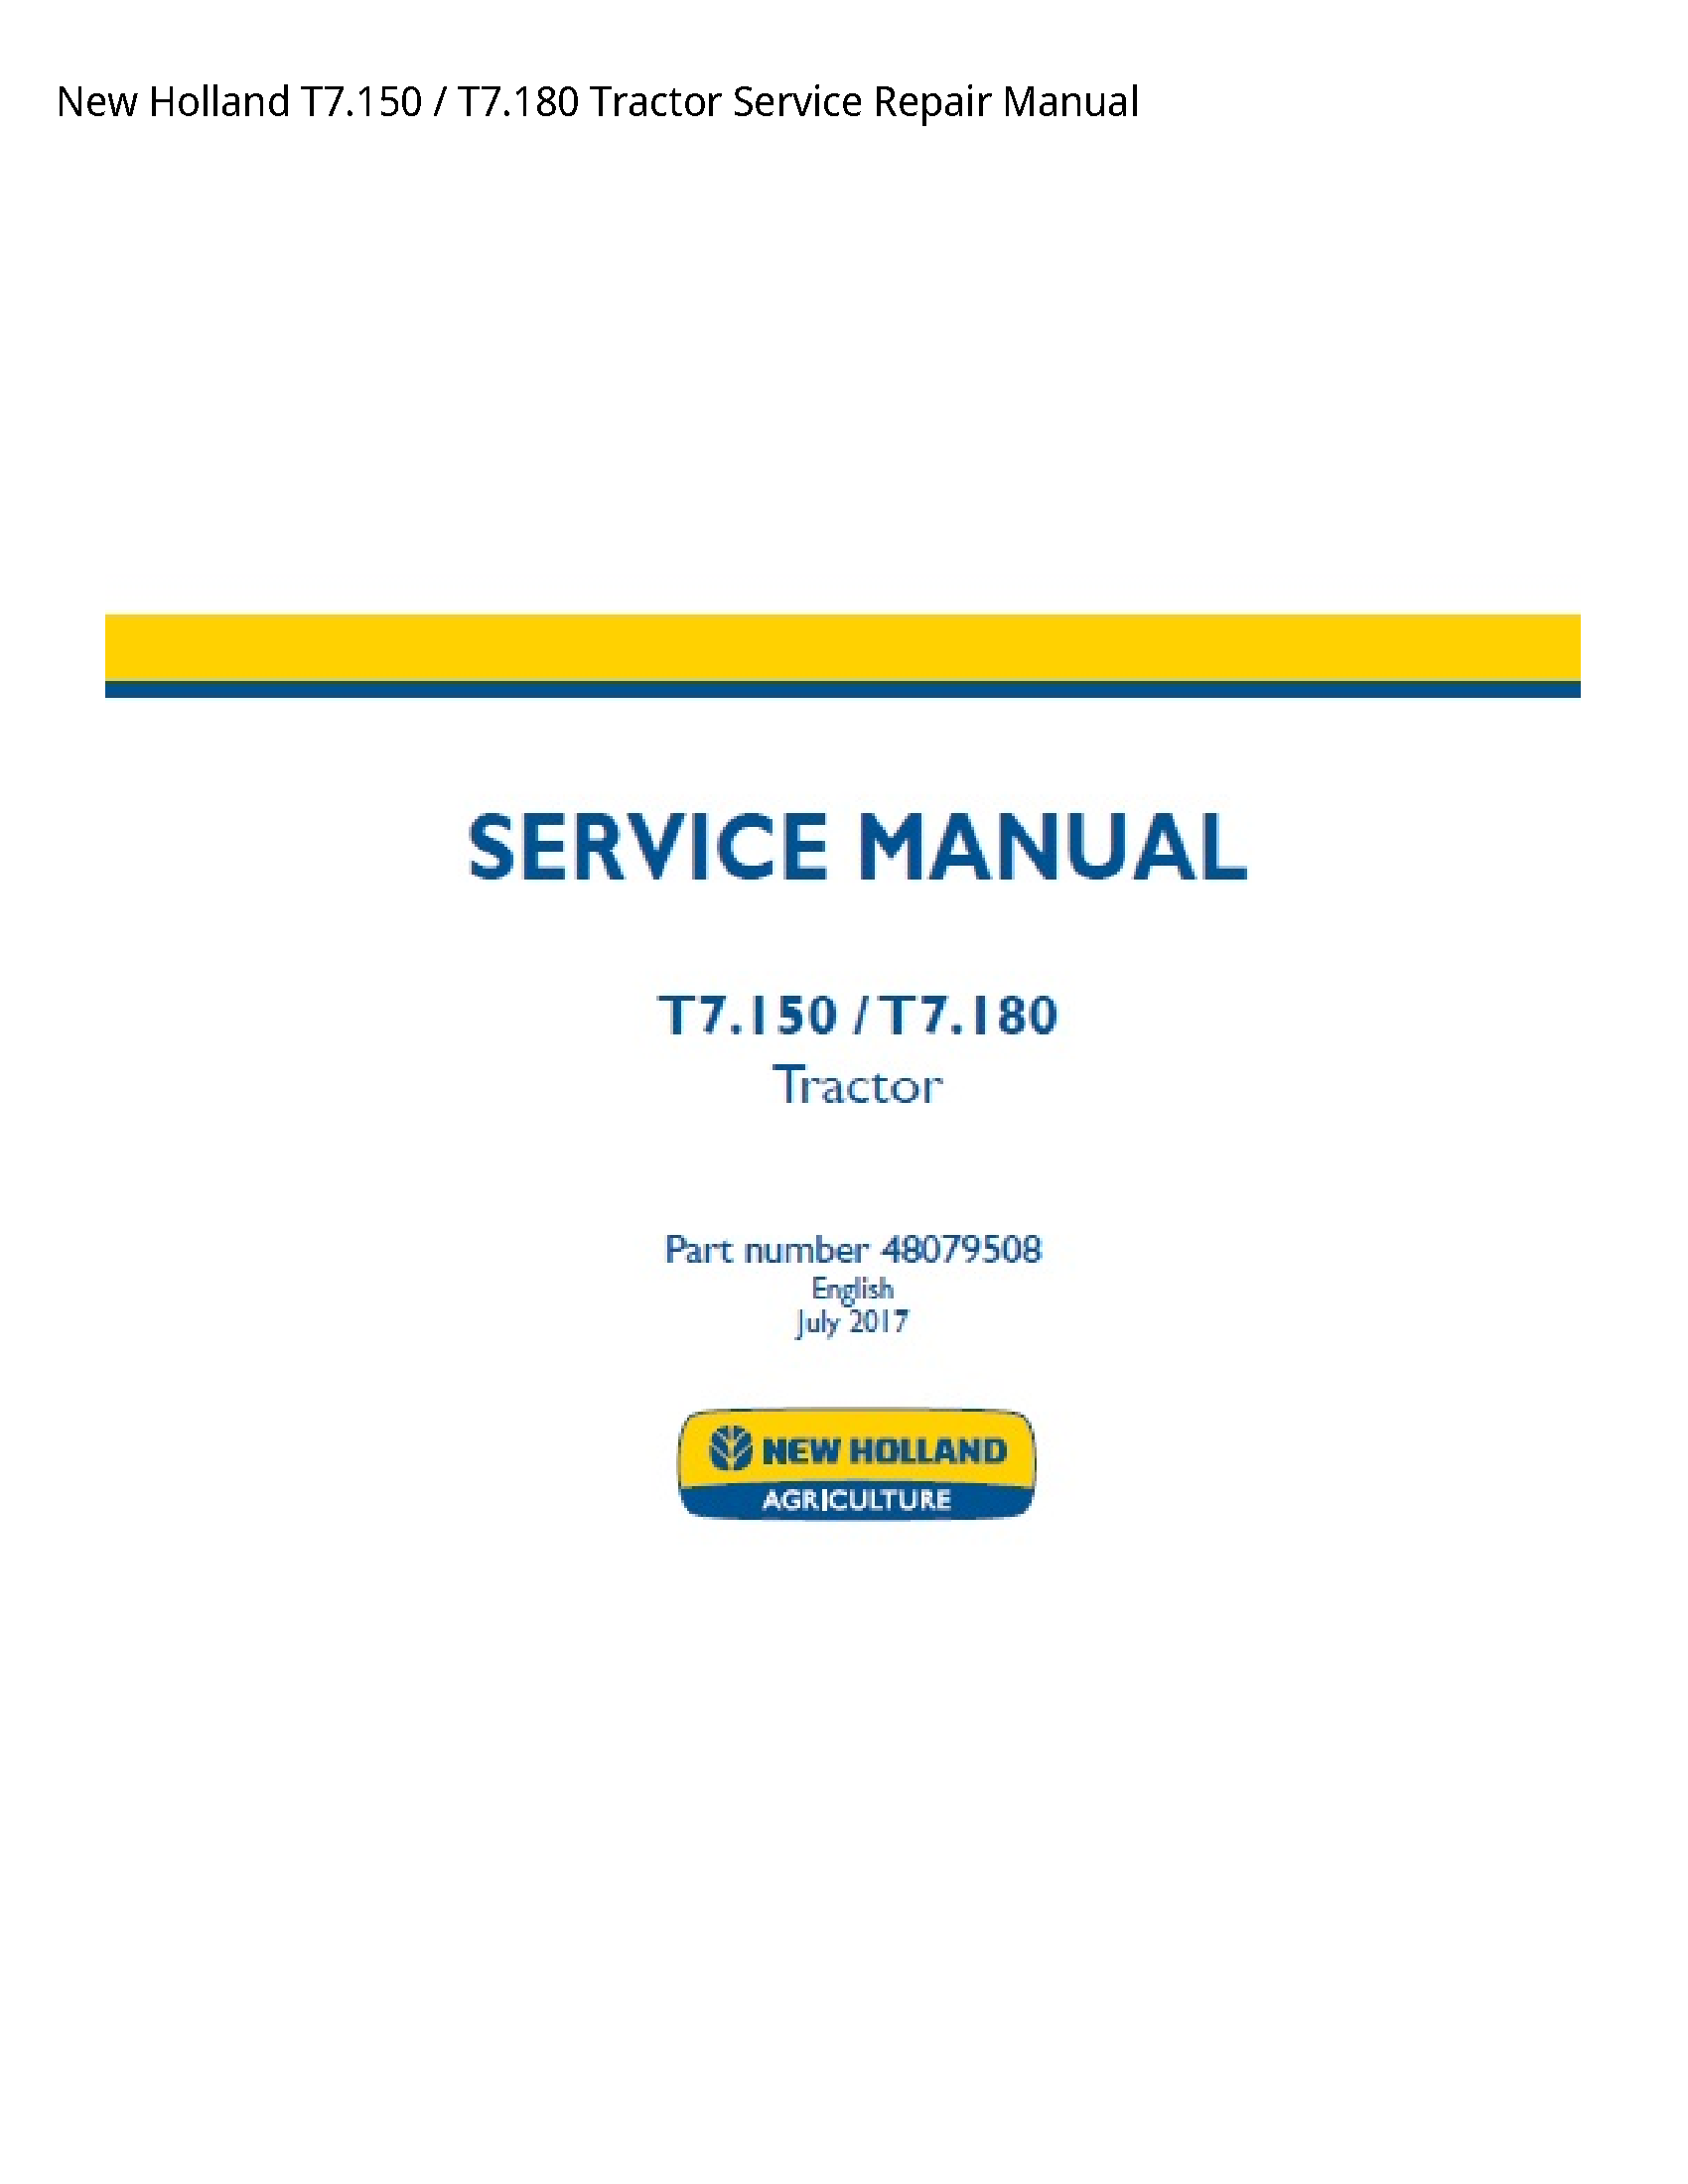 New Holland T7.150 Tractor manual